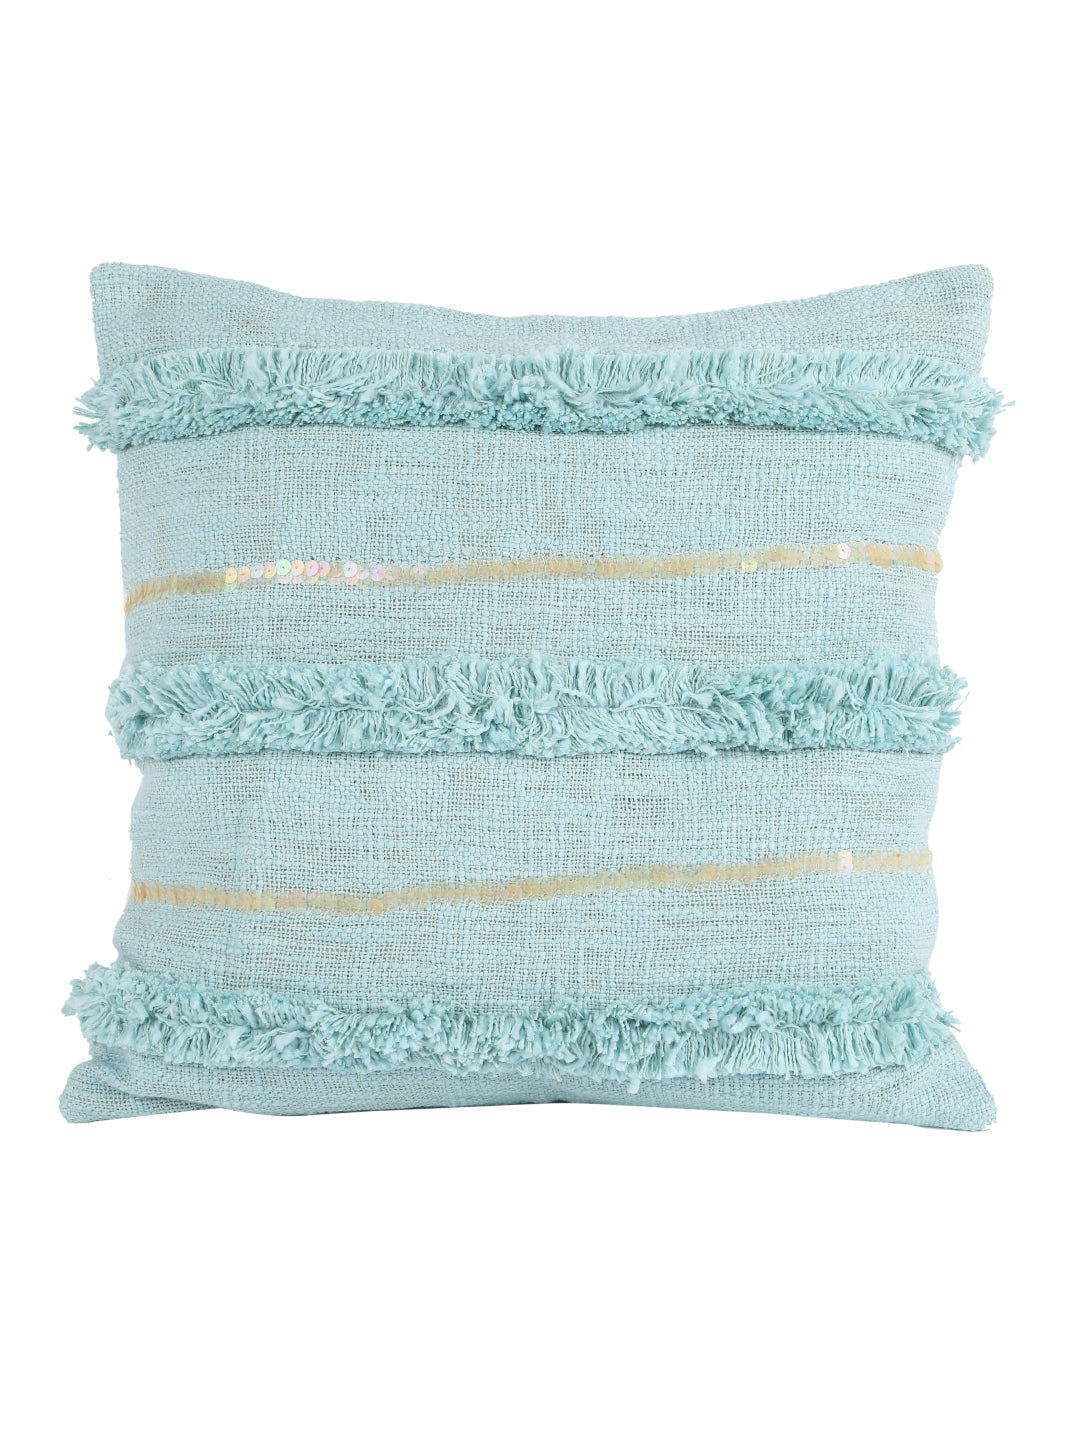 Turquoise Blue Set of 2 Embroidered Square Cushion Covers